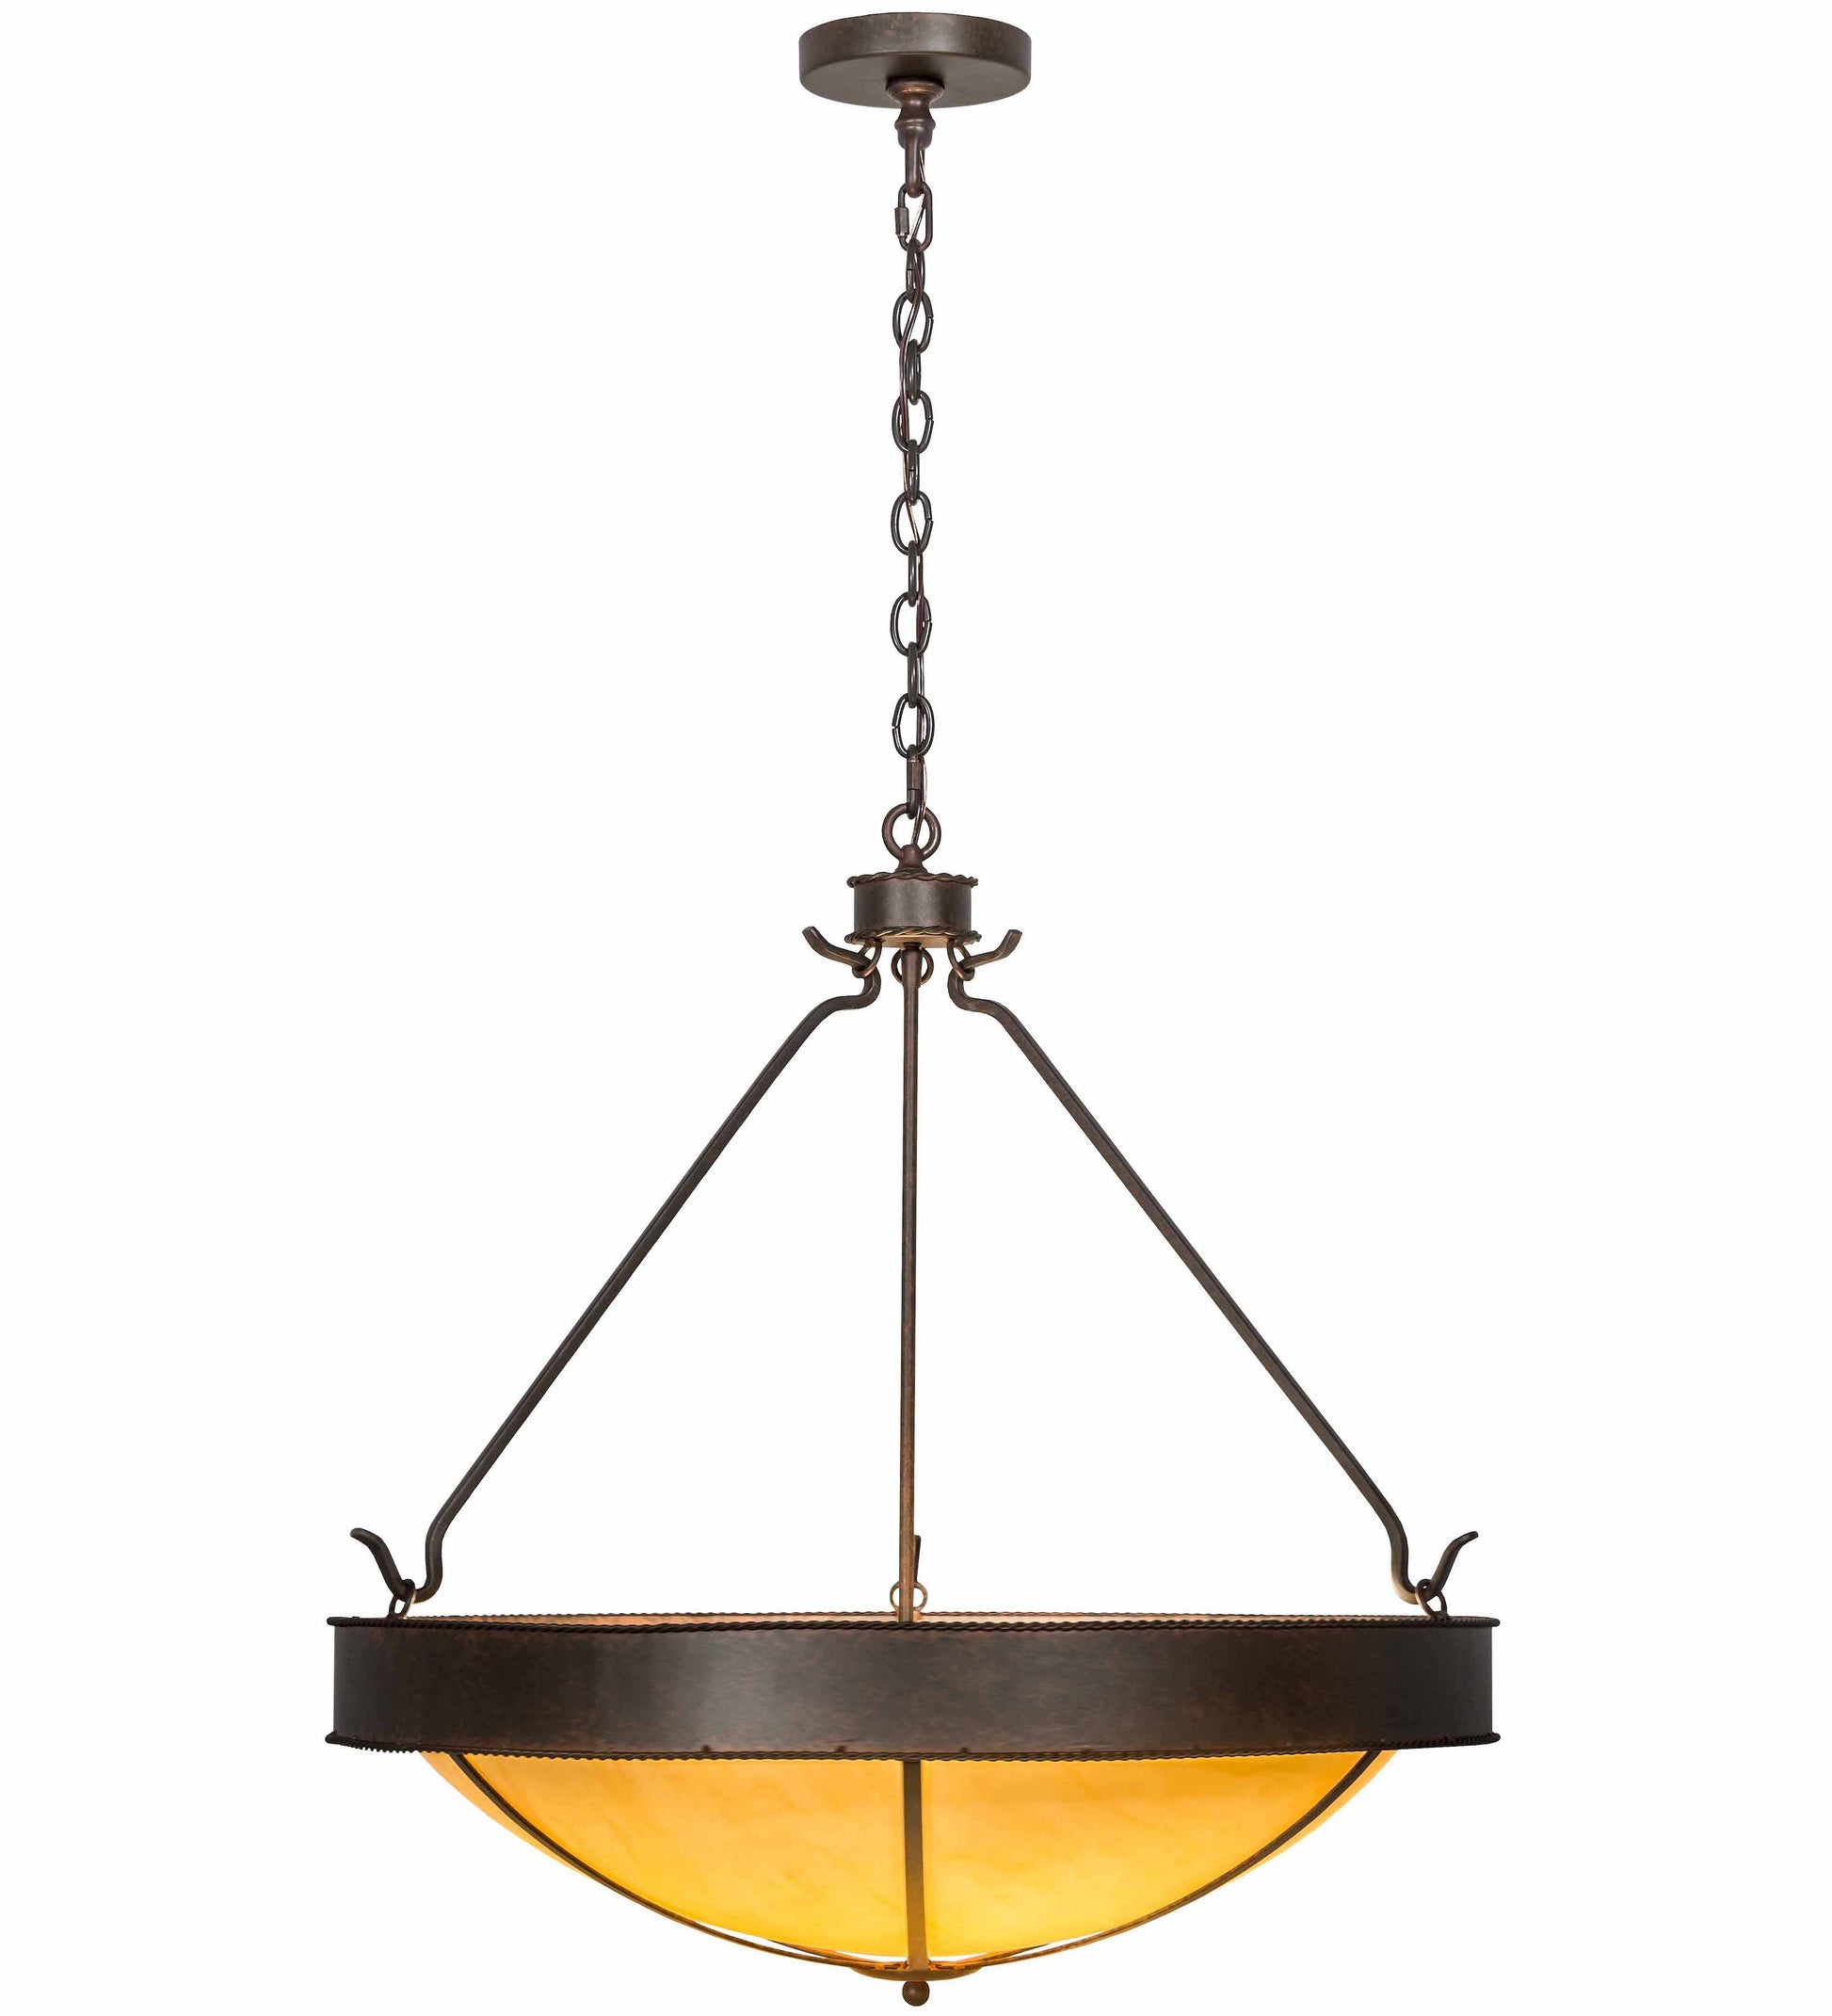 32" Phoebus Inverted Pendant by 2nd Ave Lighting